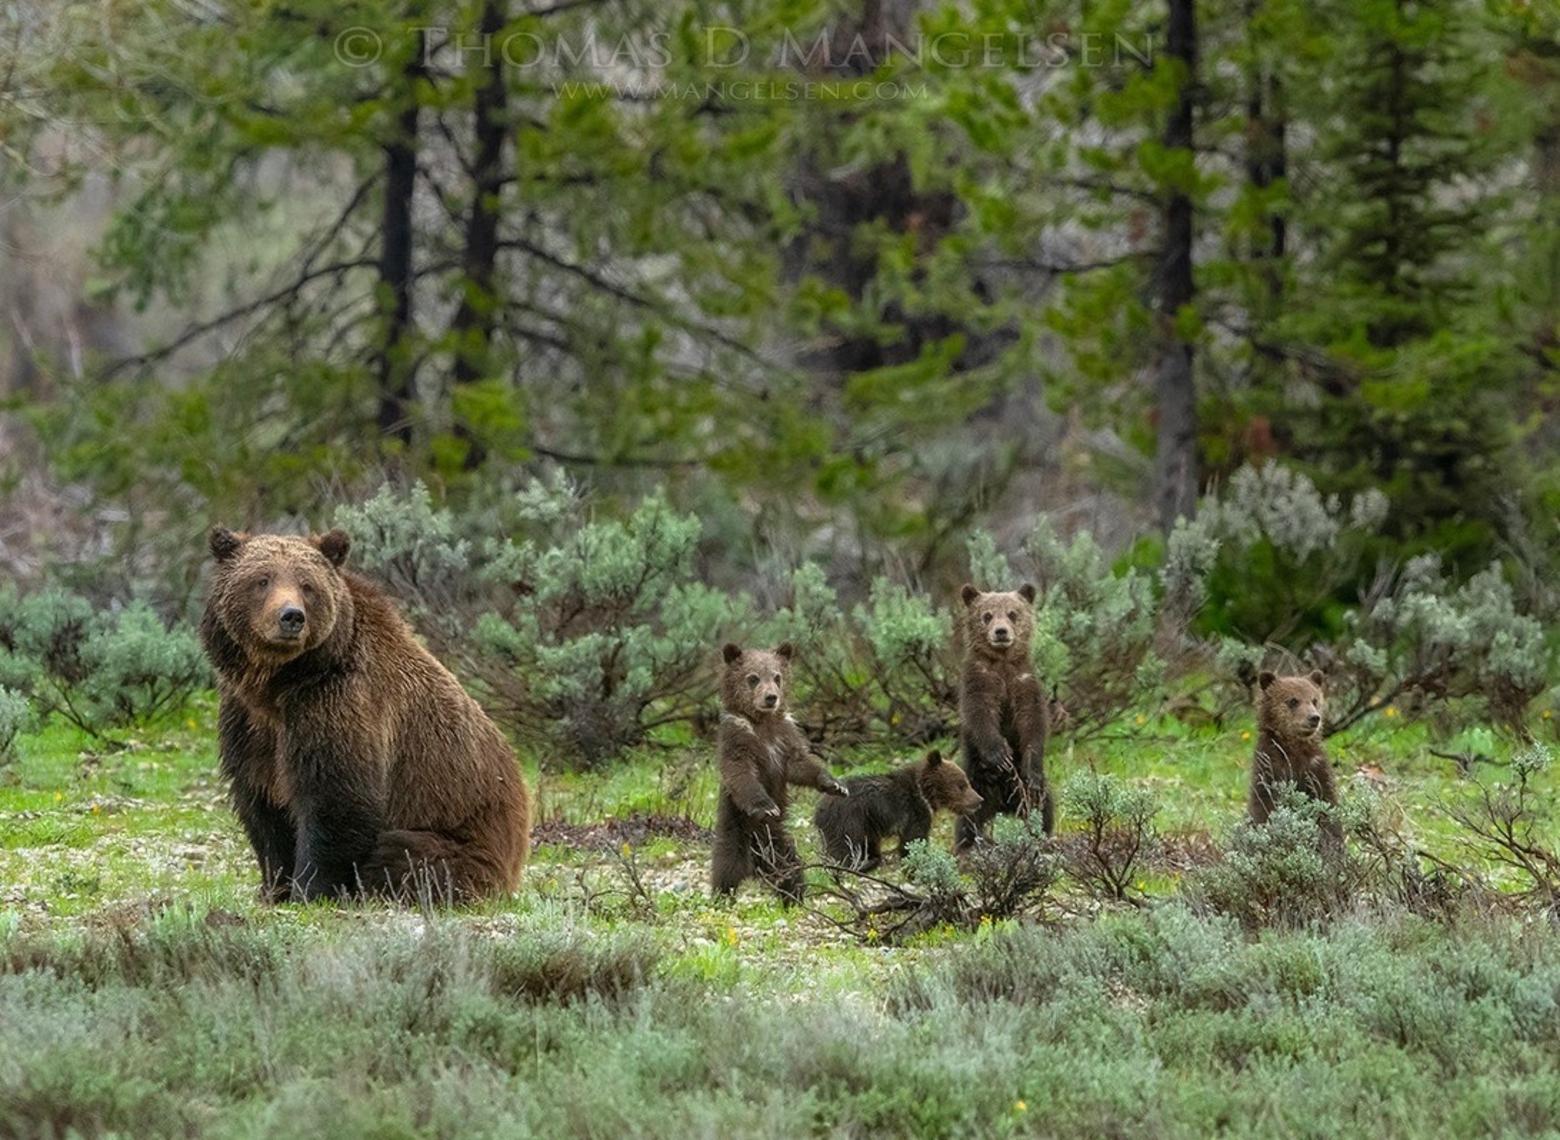 Greater Yellowstone's grizzly population is the best known in the world and one of the symbols of its beloved status is 24-year-old Jackson Hole grizzly mother 399 who this spring emerged from her den with four cubs  This image, titled "Among the Sage—399 and Quadruplets" is a new print release by Thomas Mangelsen and we are grateful for his permission to use it. You can view more of Mangelsen's work at Mangelsen.com